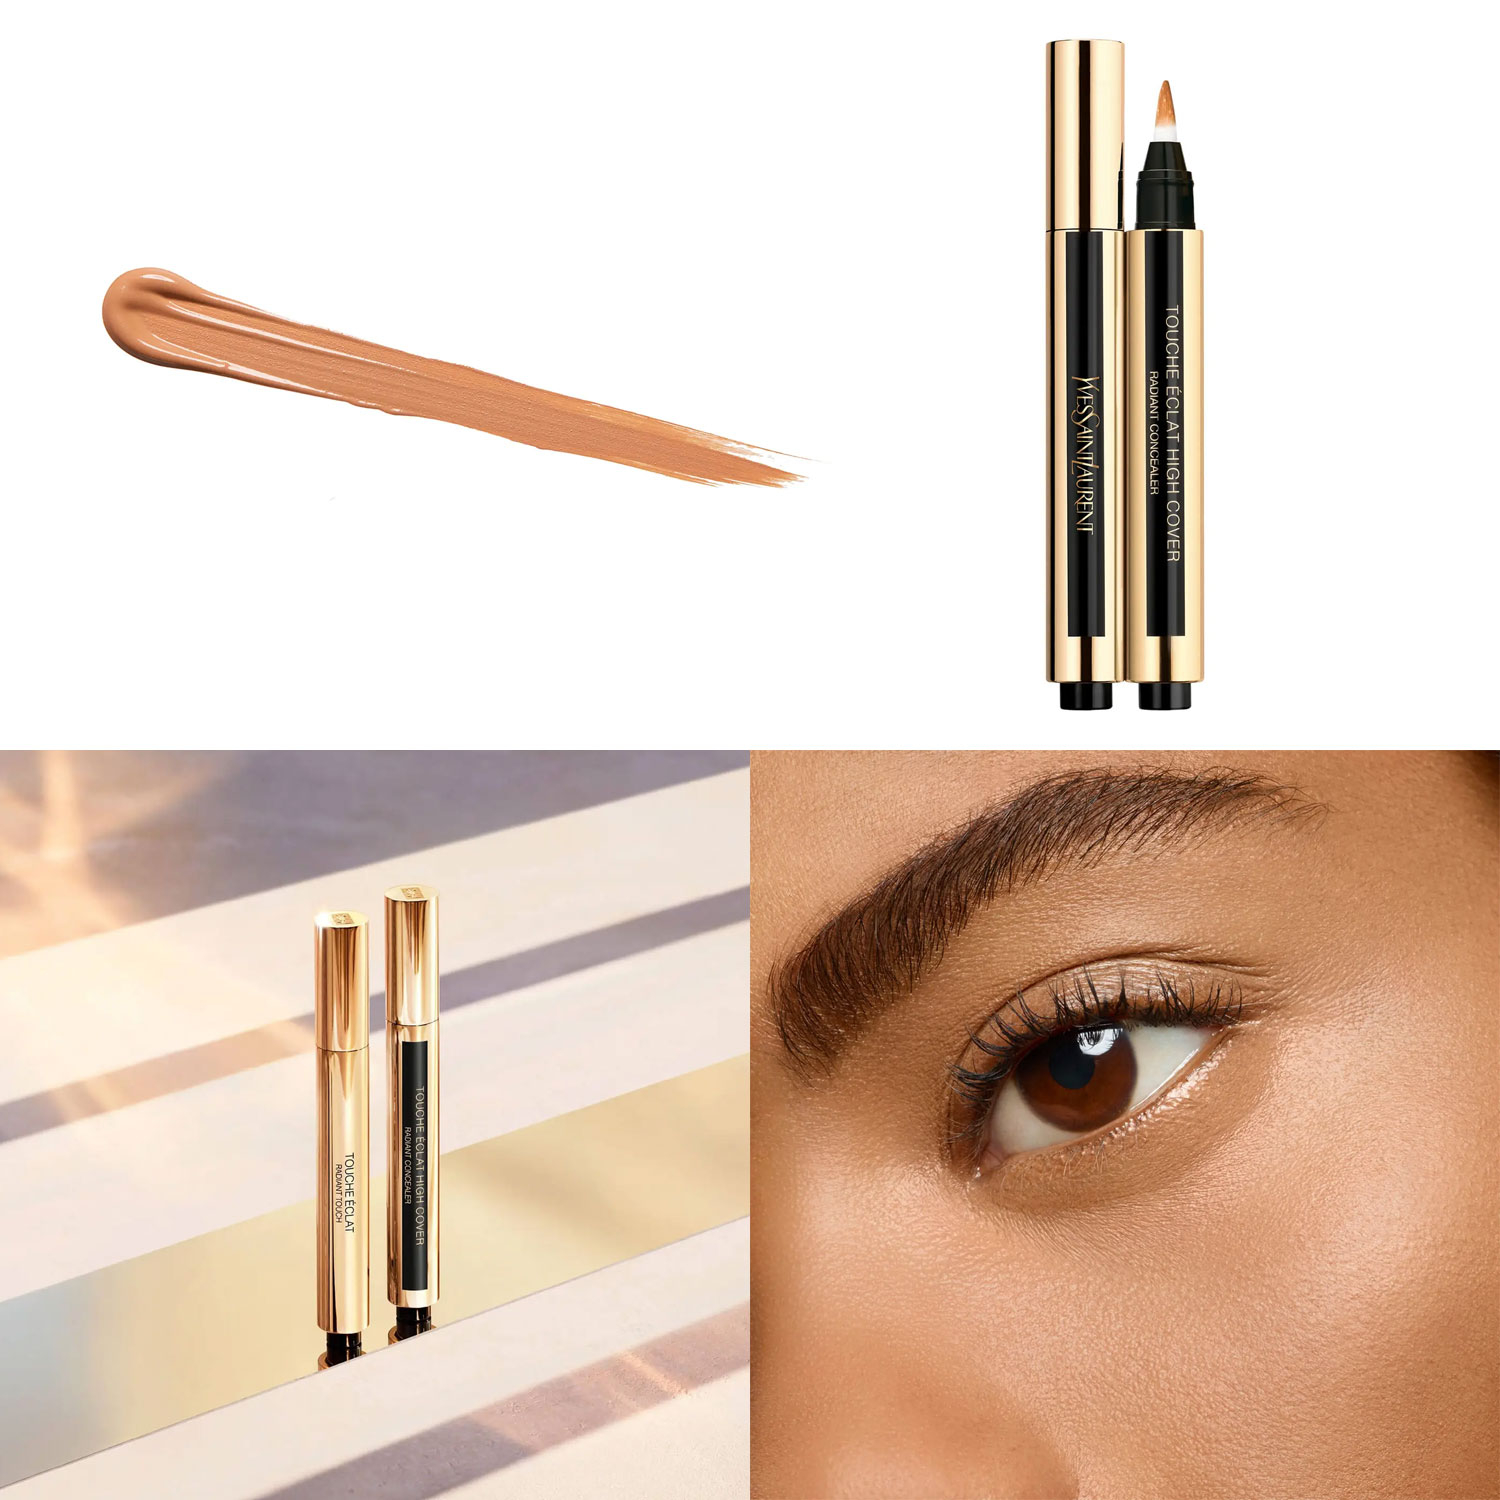 ysl touche eclat concealer coverage